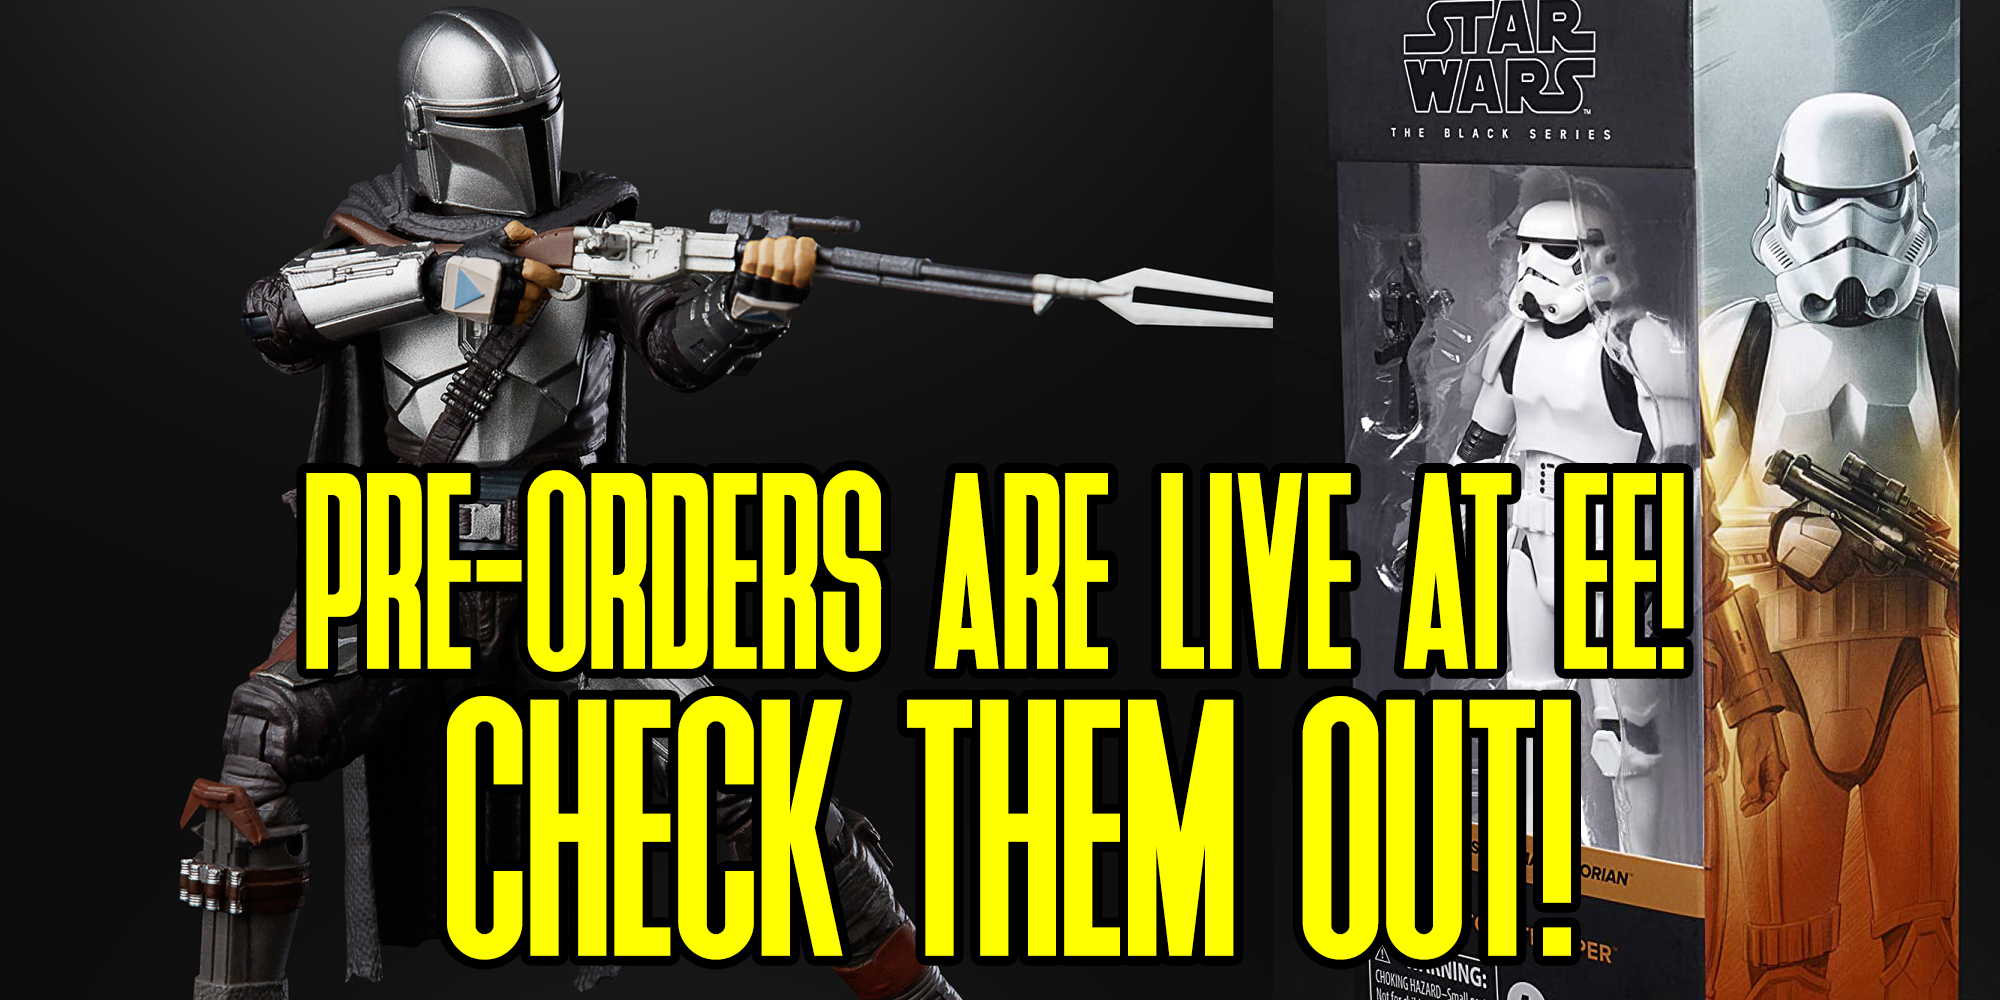 NEW BLACK SERIES FIGURES AVAILABLE THROUGH EE